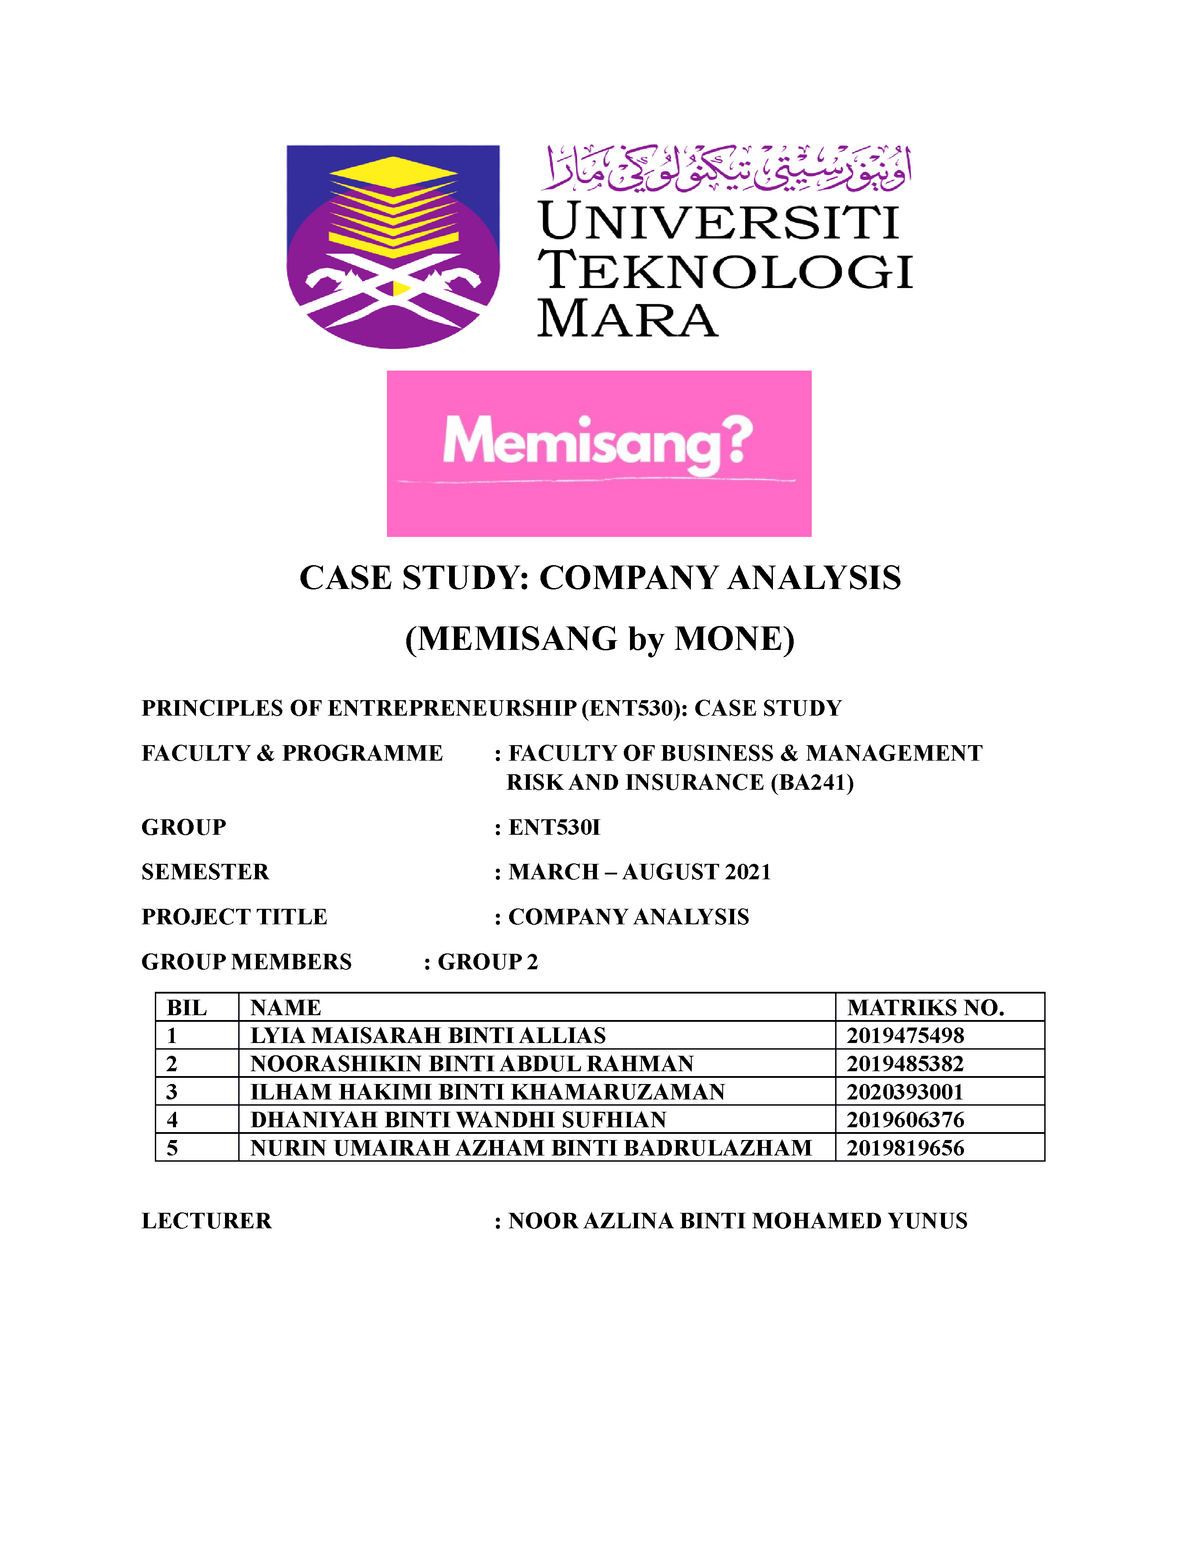 ENT530 CASE STUDY - CASE STUDY: COMPANY ANALYSIS (MEMISANG by MONE